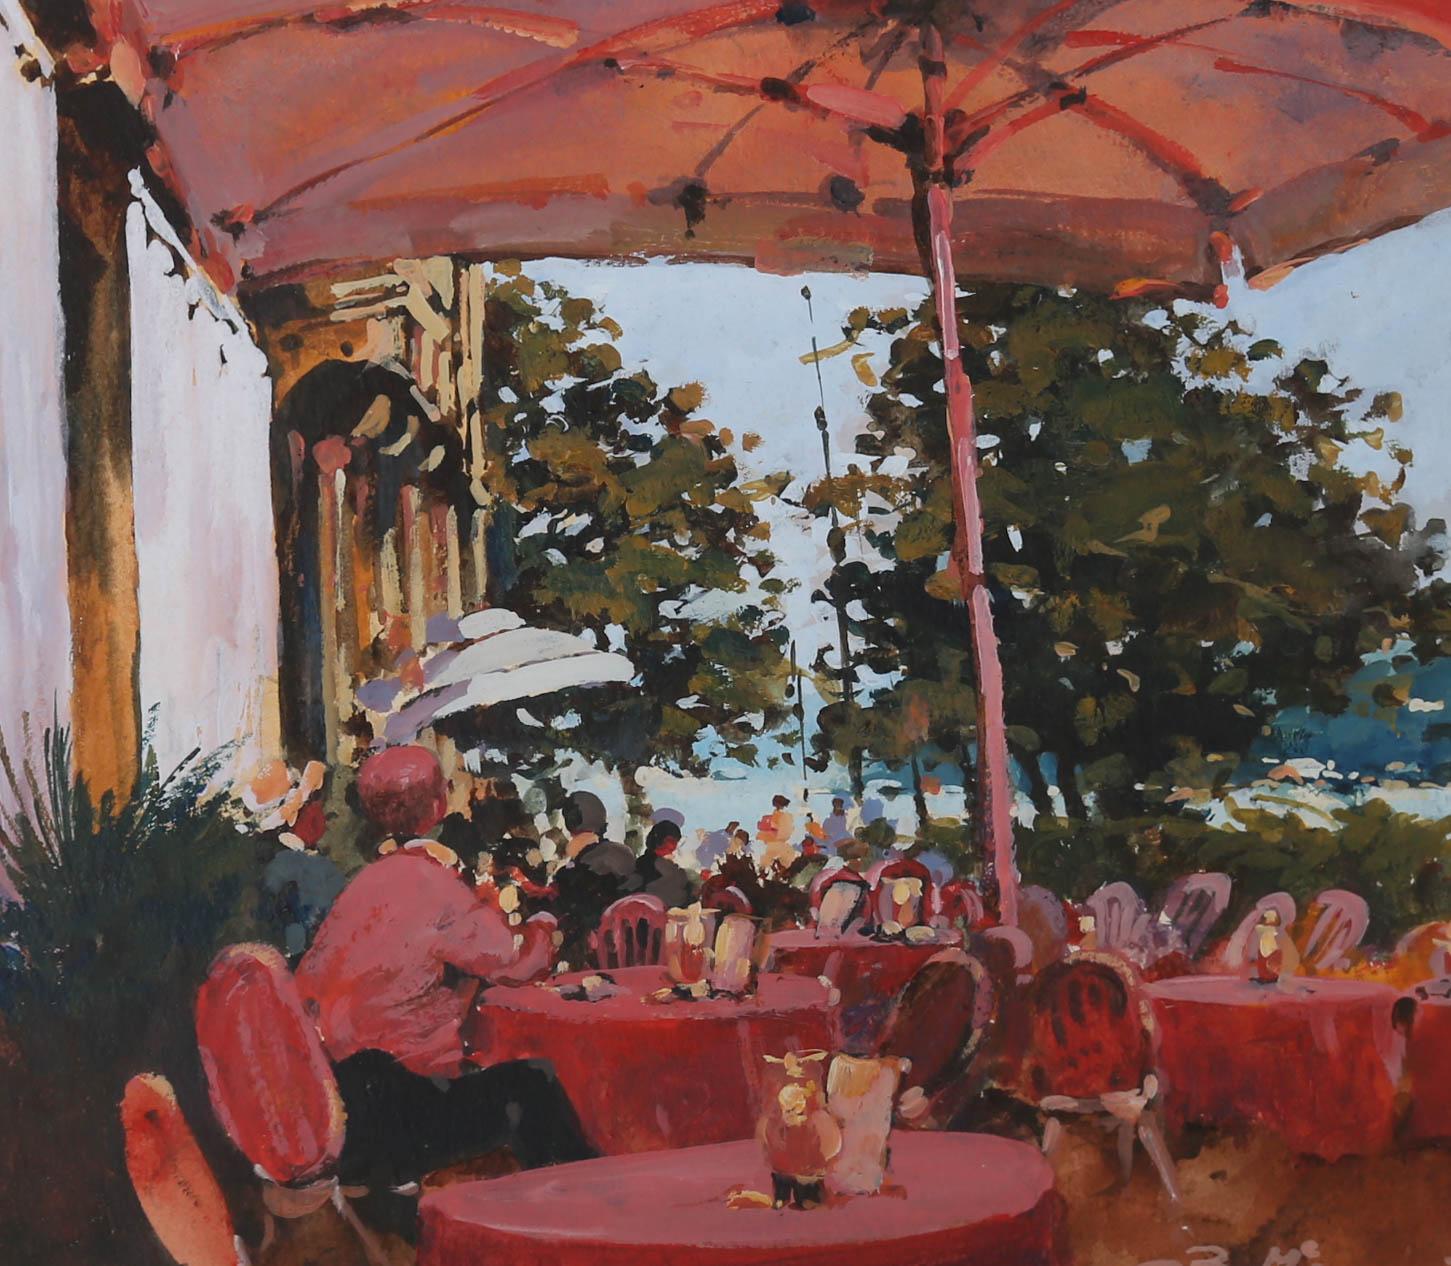 This colourful gouache by British artist Bernard McDonald (b.1944), depicts al fresco tables screened from the hot Italian sun. The restaurant's red furnishings fill the painting's foreground, with glimpses of the sea hinted through ruffled green